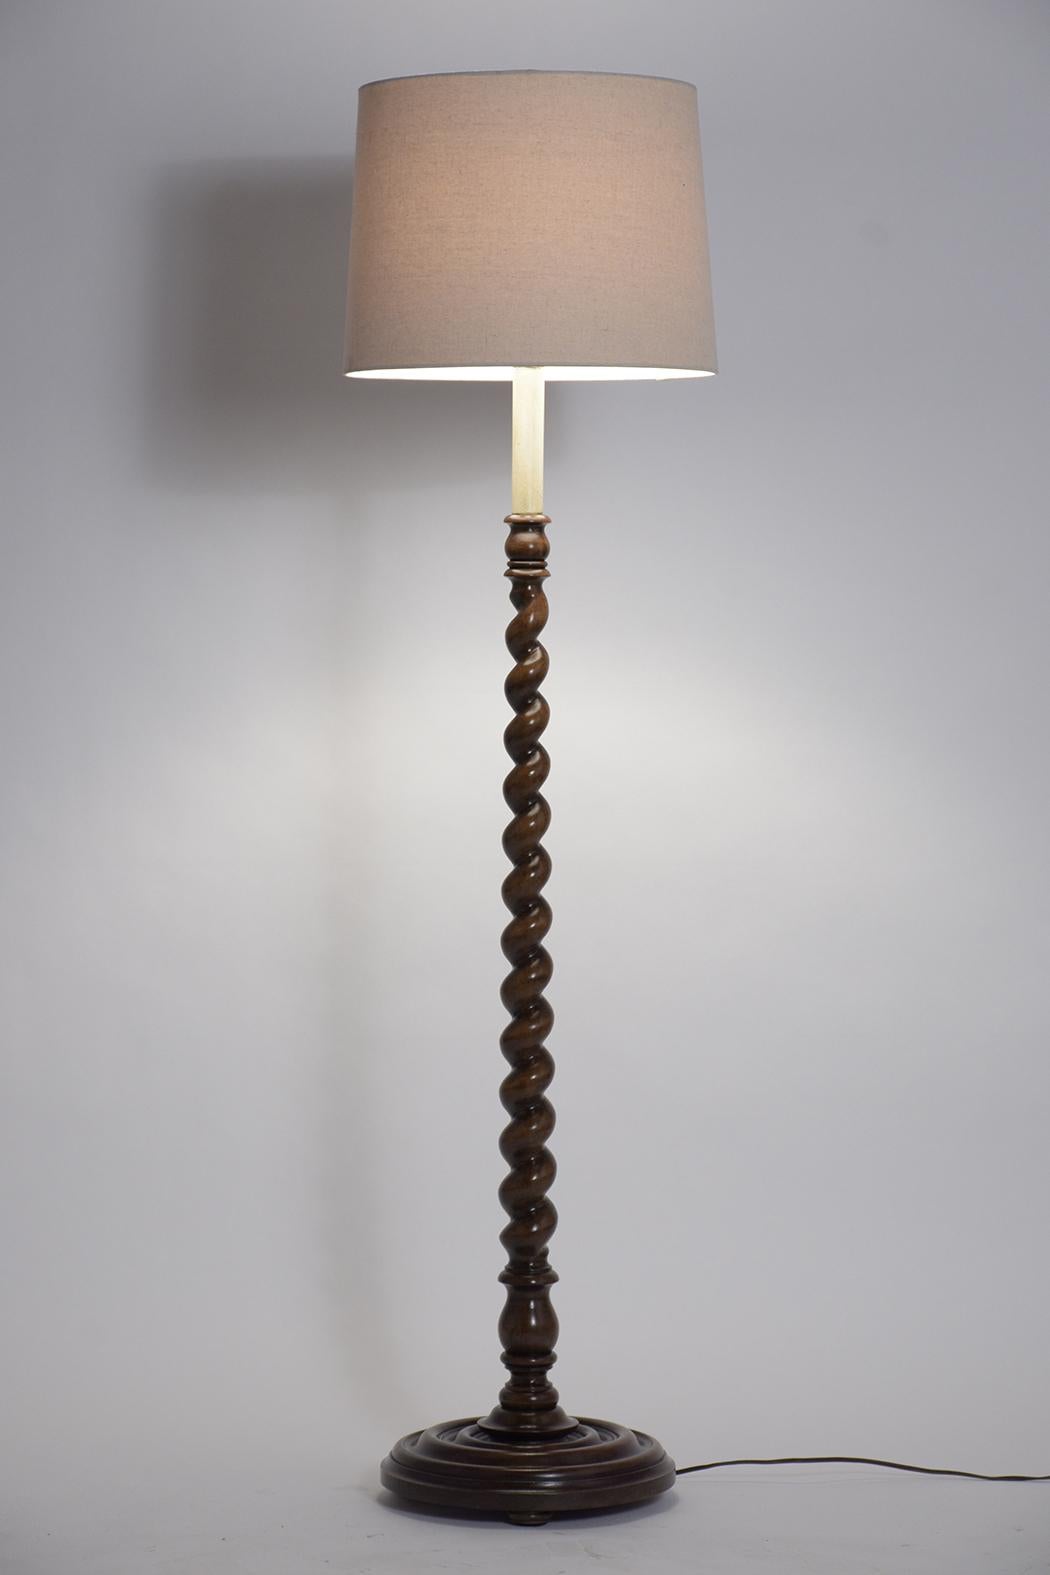 A fabulous French 19th century floor lamp handcrafted out of walnut wood. This lamp features finely carved details its original walnut finish, newly waxed and polished showing a beautiful patina finish. The lamp has a new shade and is wired to US